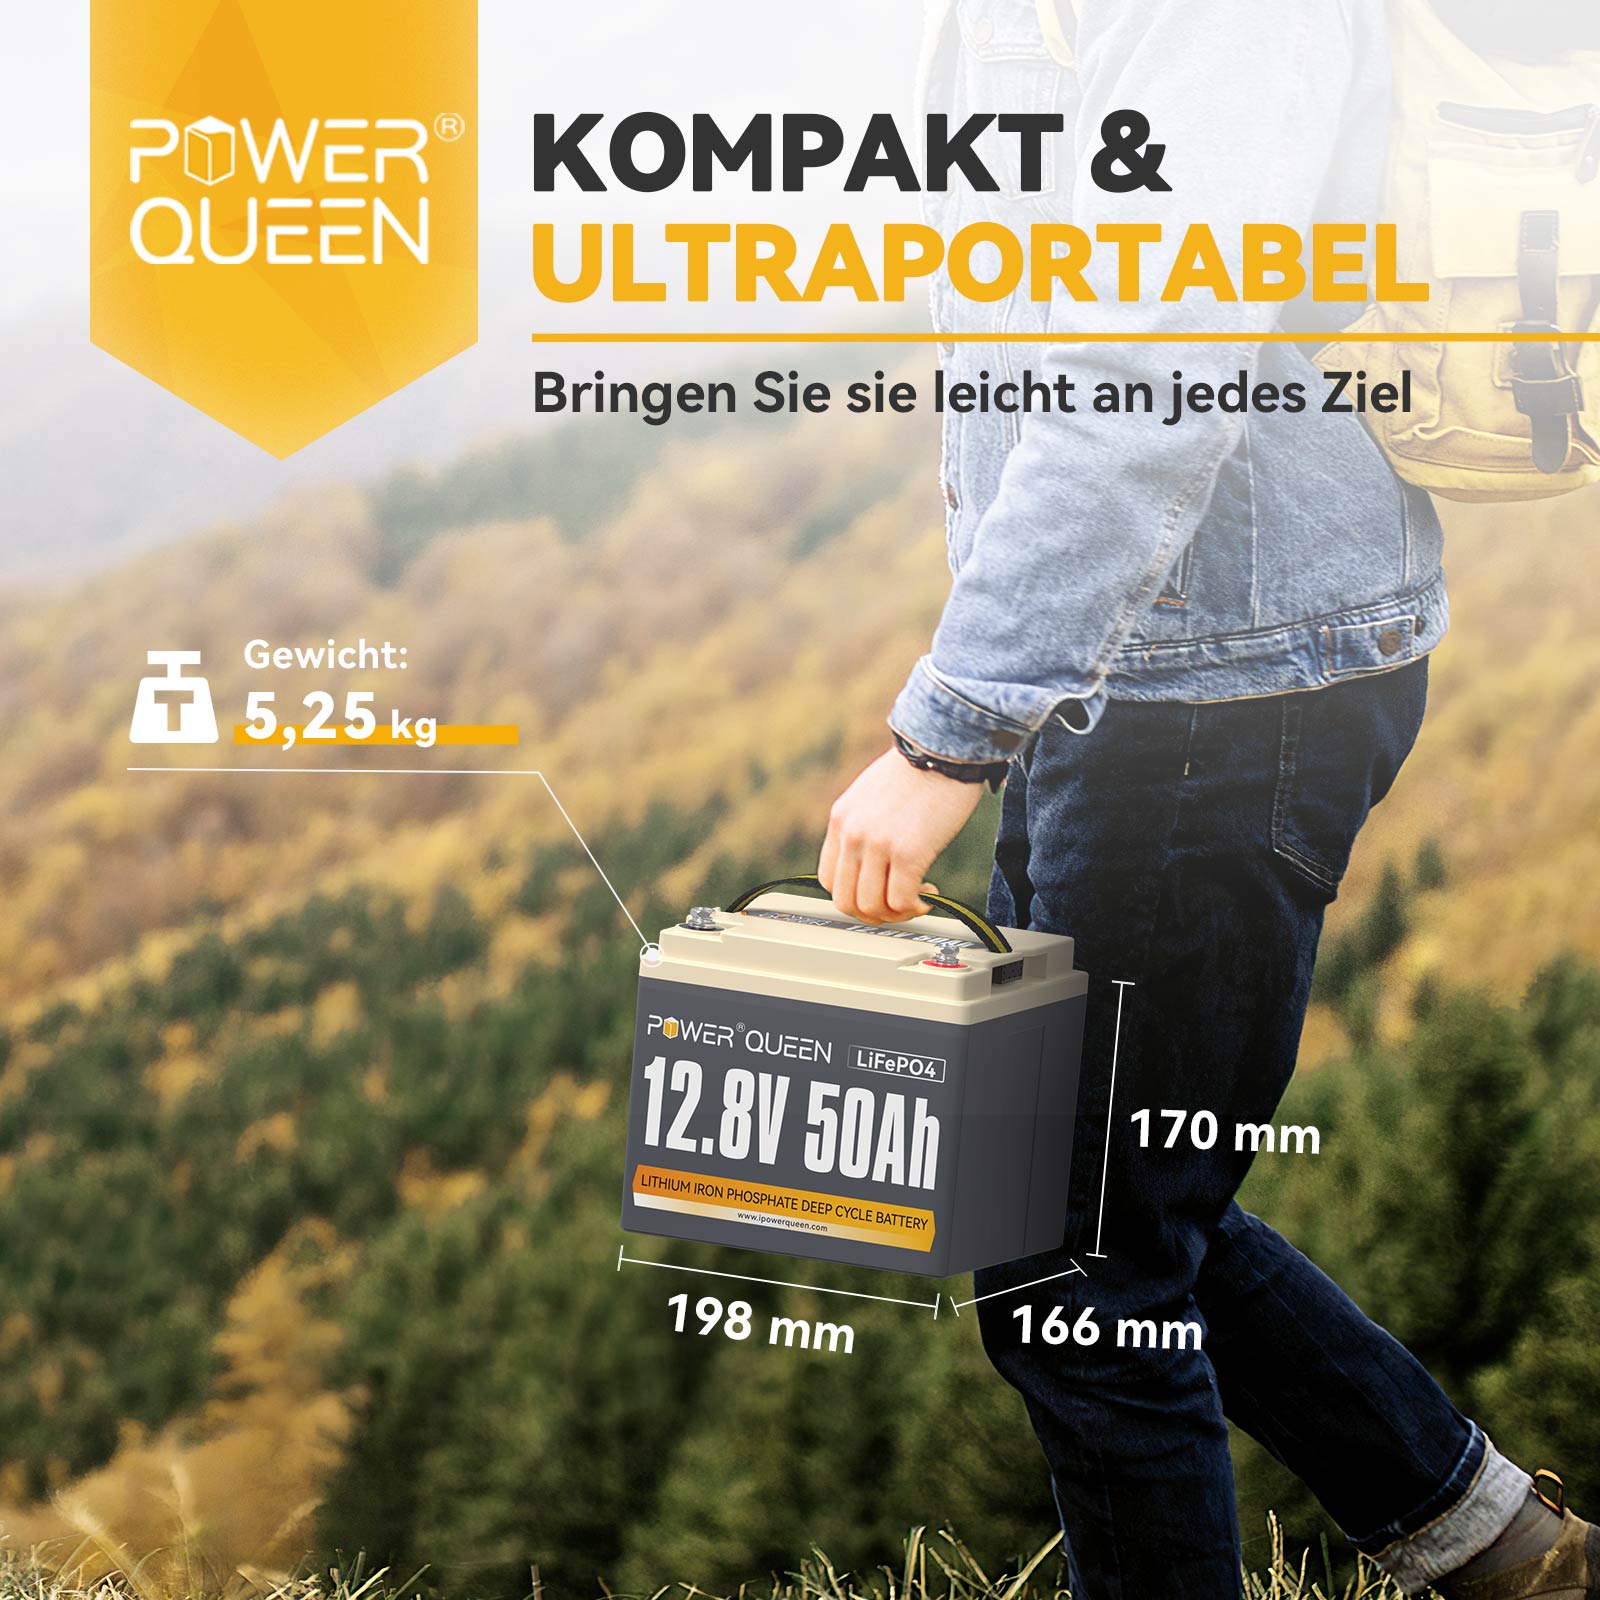 Power Queen 12.8V 50Ah LiFePO4 battery, built-in 50A BMS